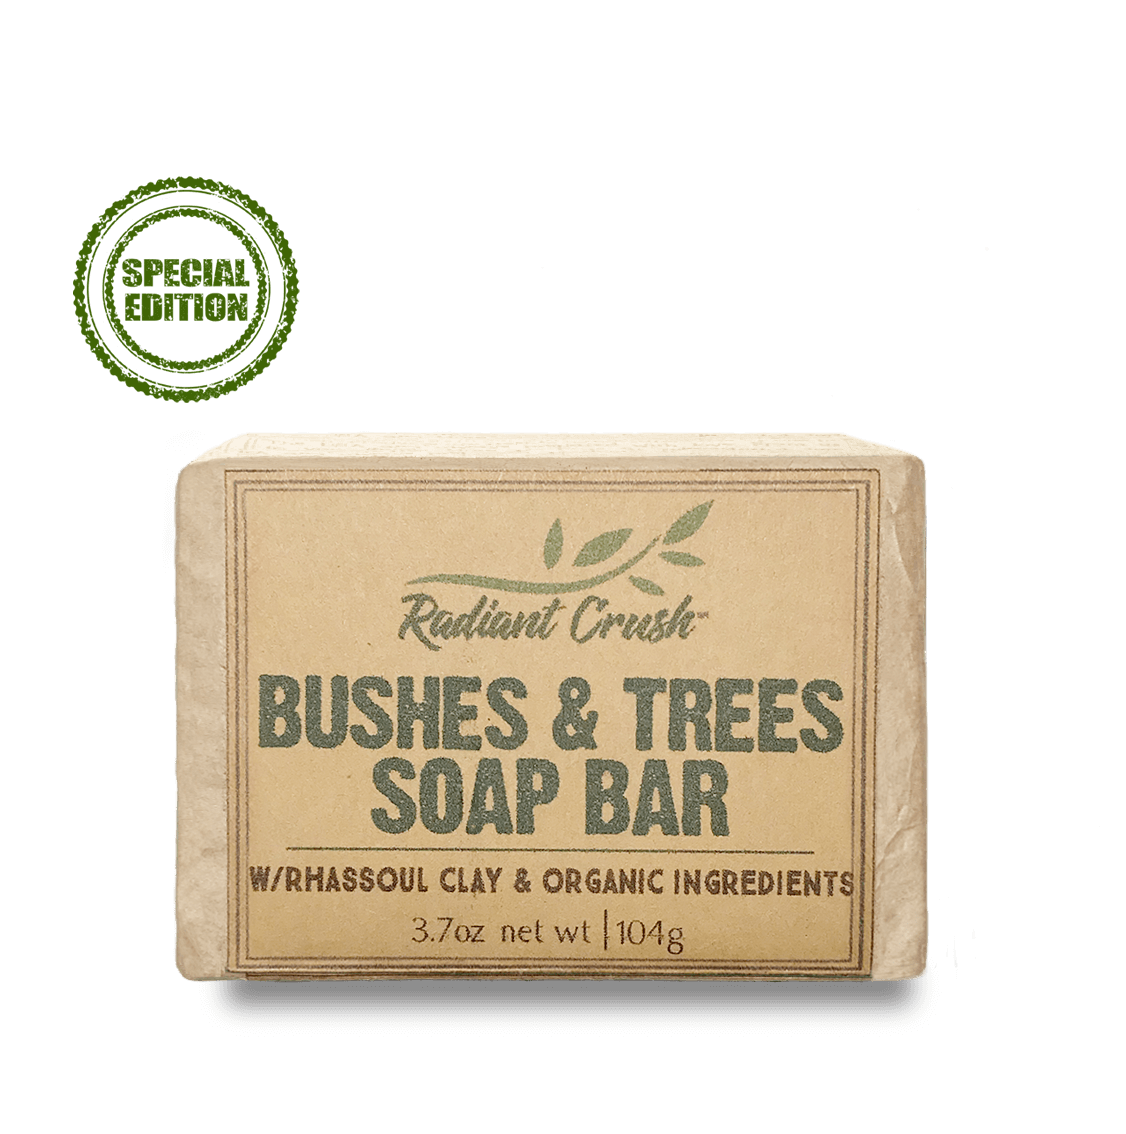 Private Hygiene Soap Bar Bushes and Trees - Radiant Crush